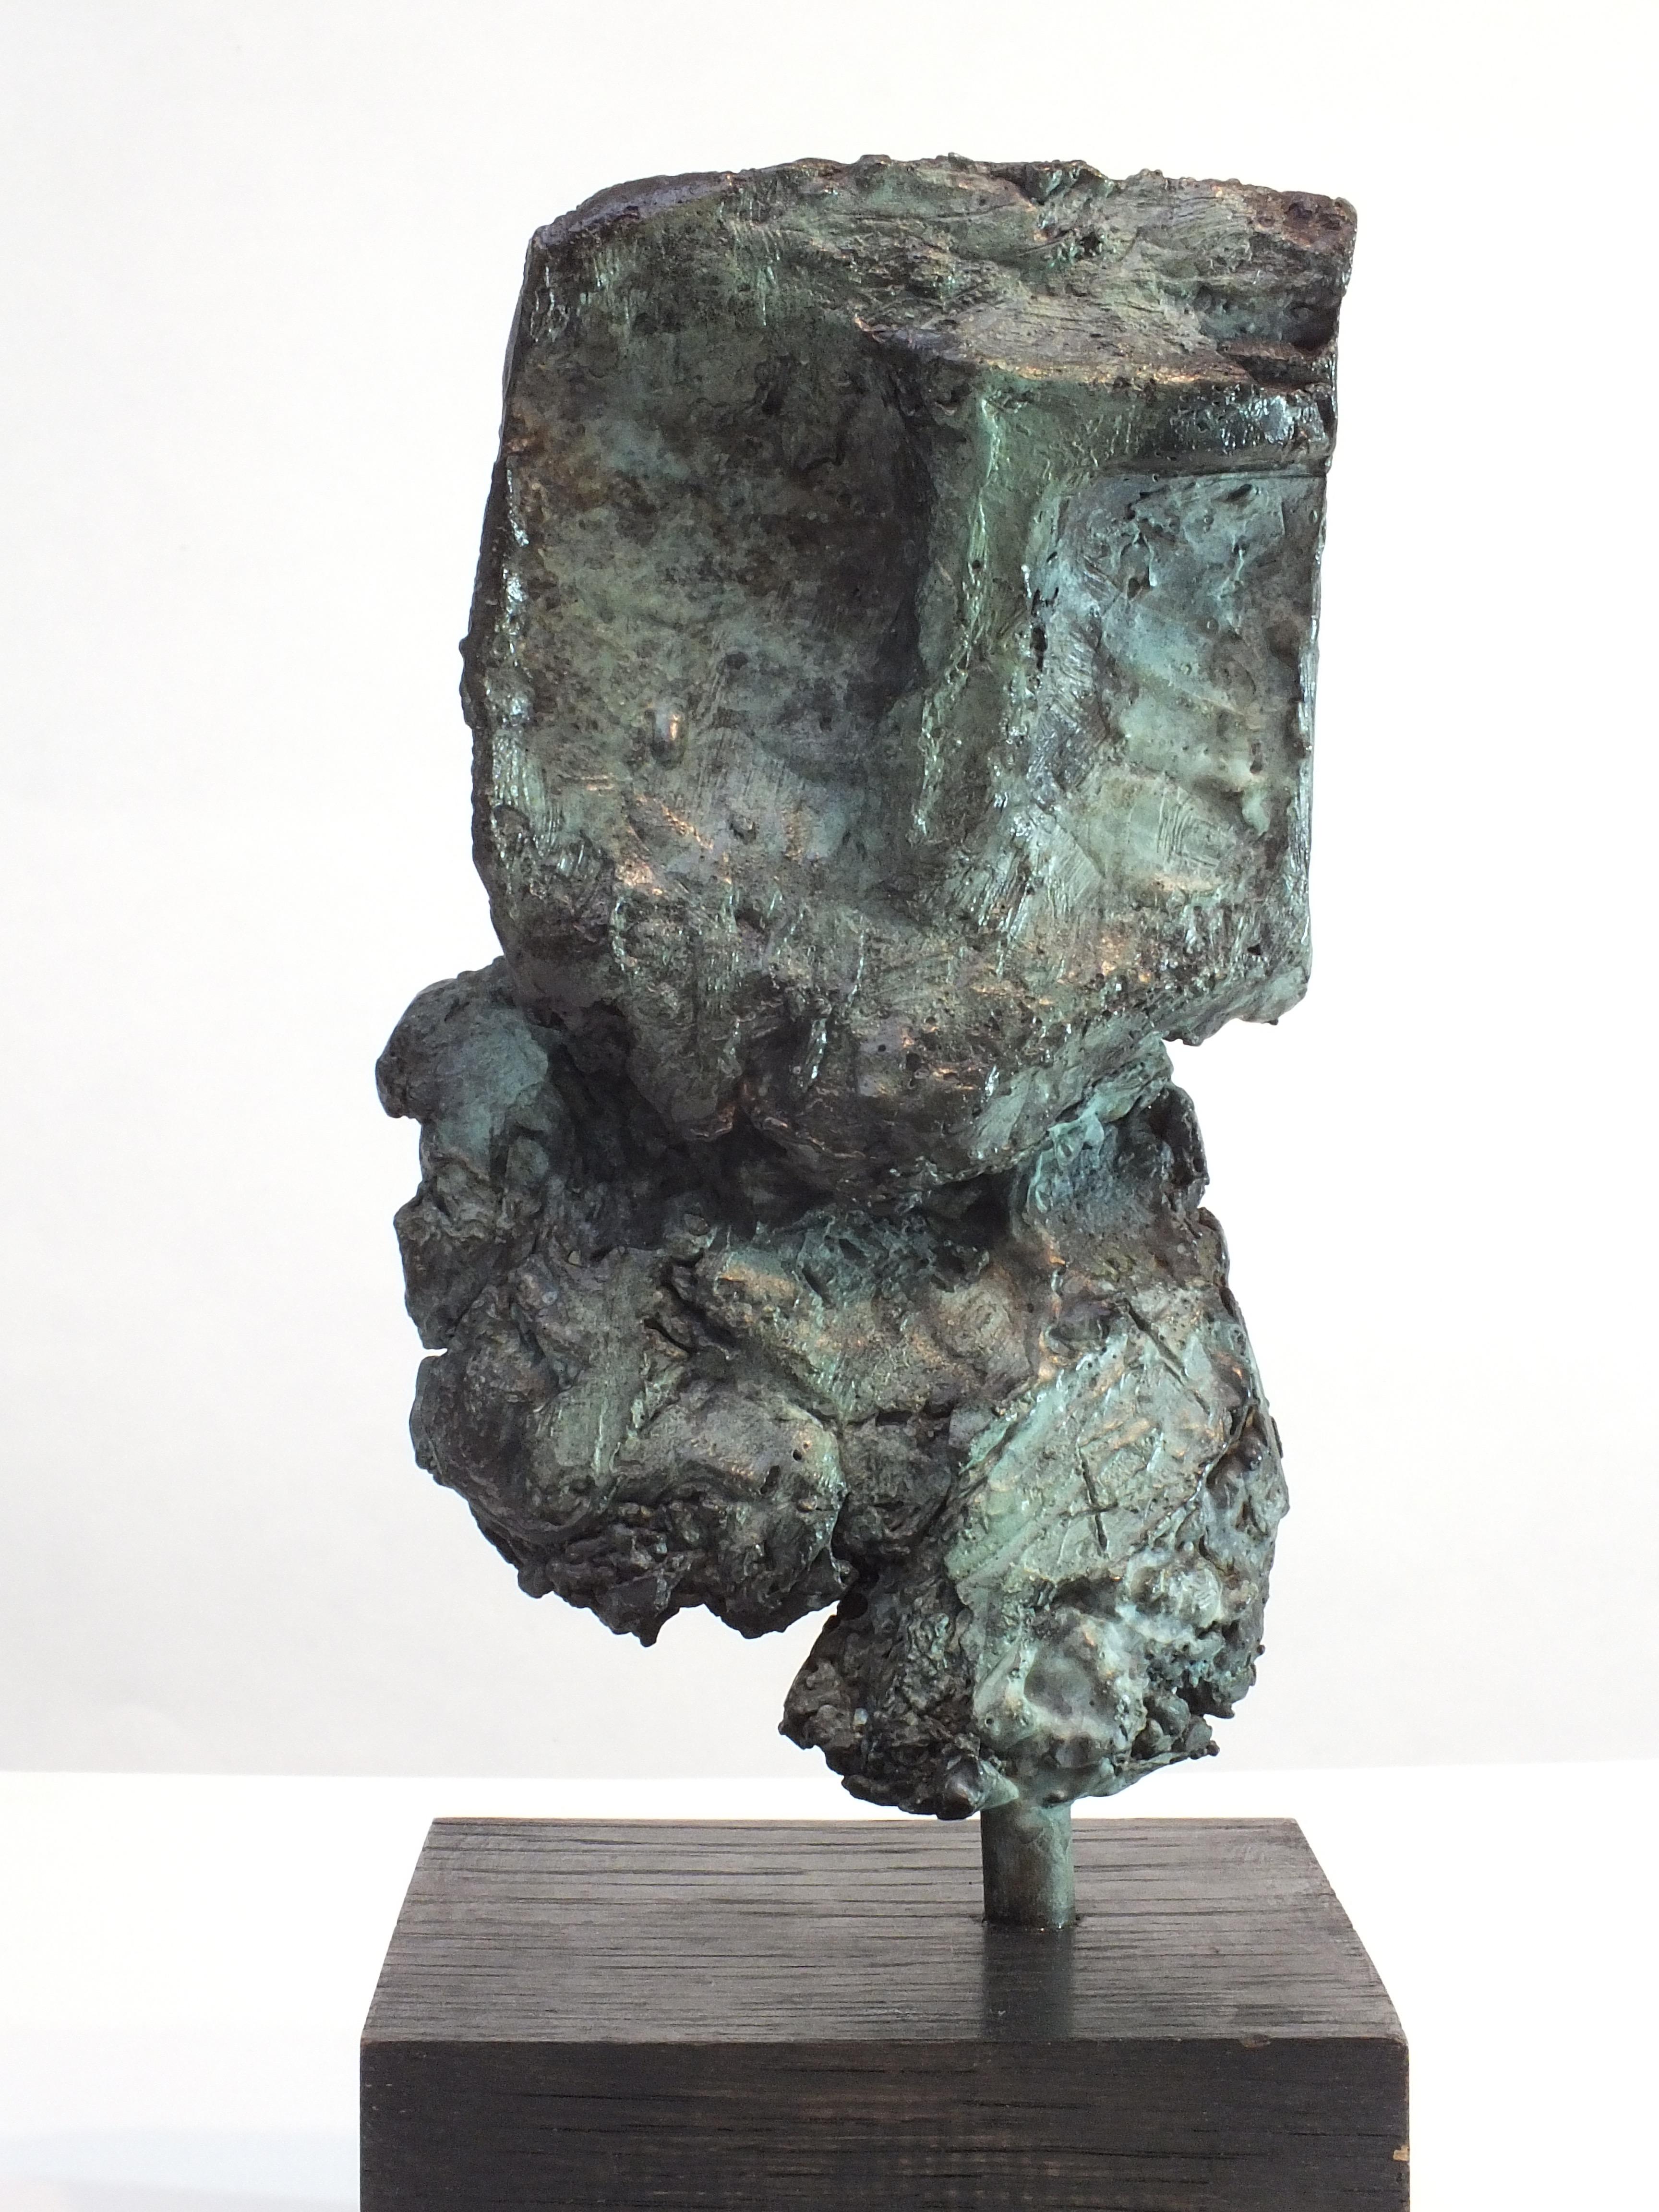 Rugged and solid having absorbed the elements from time immemorial the Sentinel watches and waits. This is an elemental casting from the Black Mountain studio of sculptor Tim Rawlins. This piece has a deep background story but he remains silent,